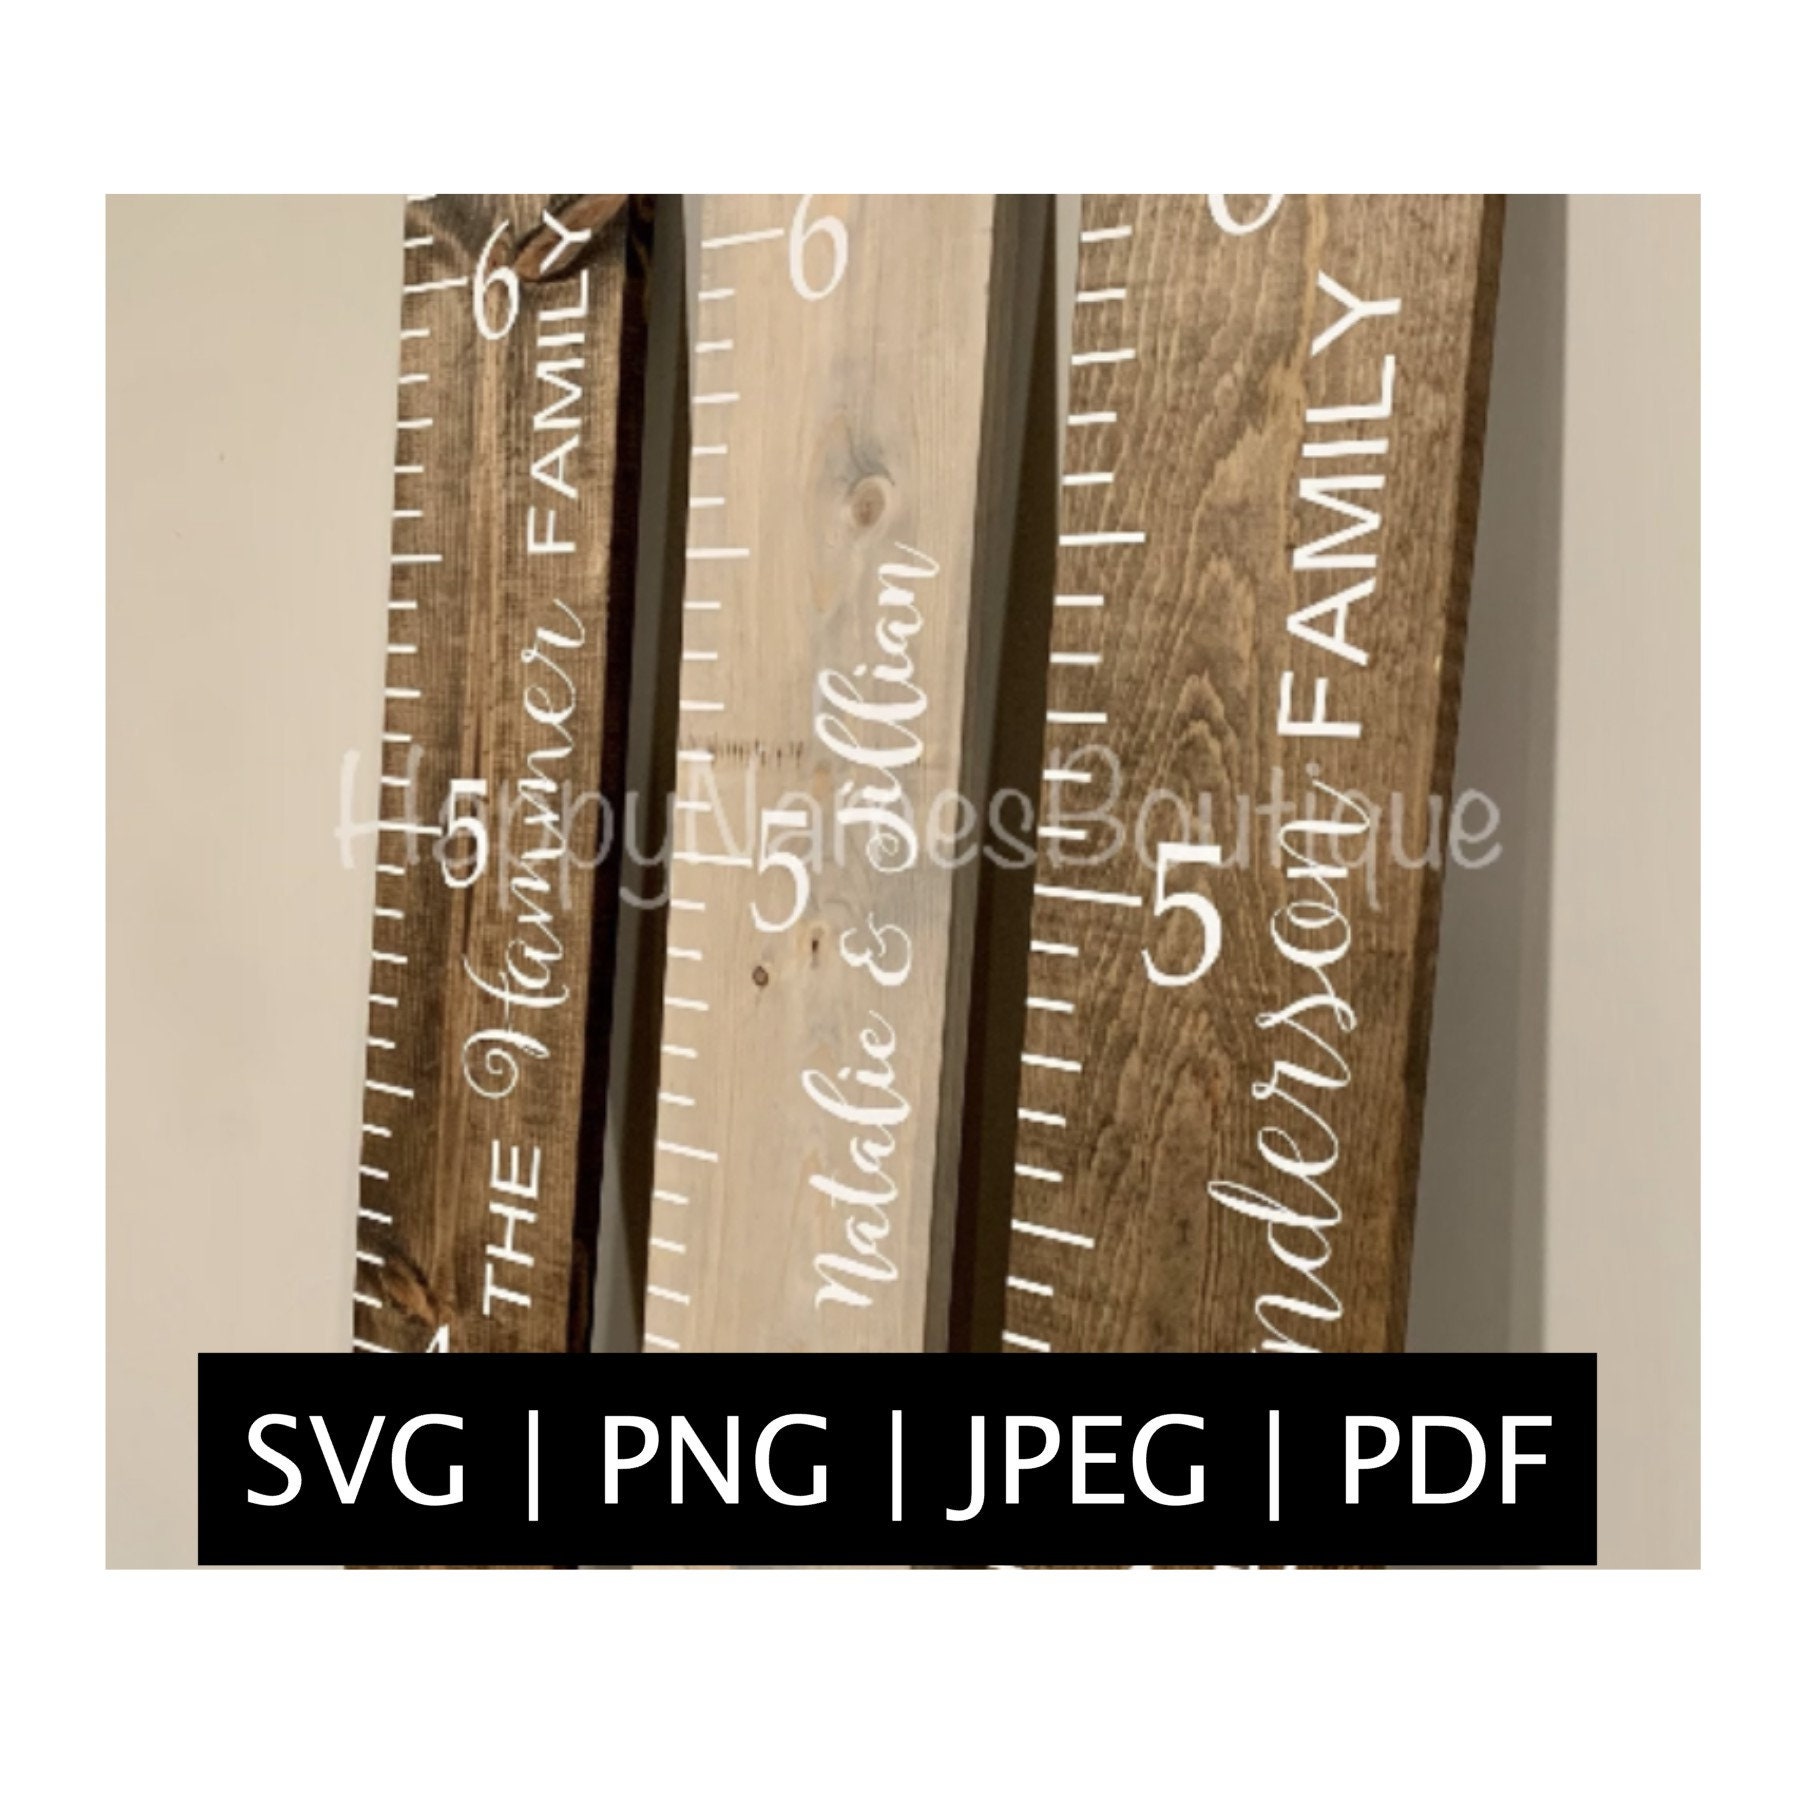 Small Ruler Outline Cut File Svg, Png, Pdf, Dxf, Eps for Cutting